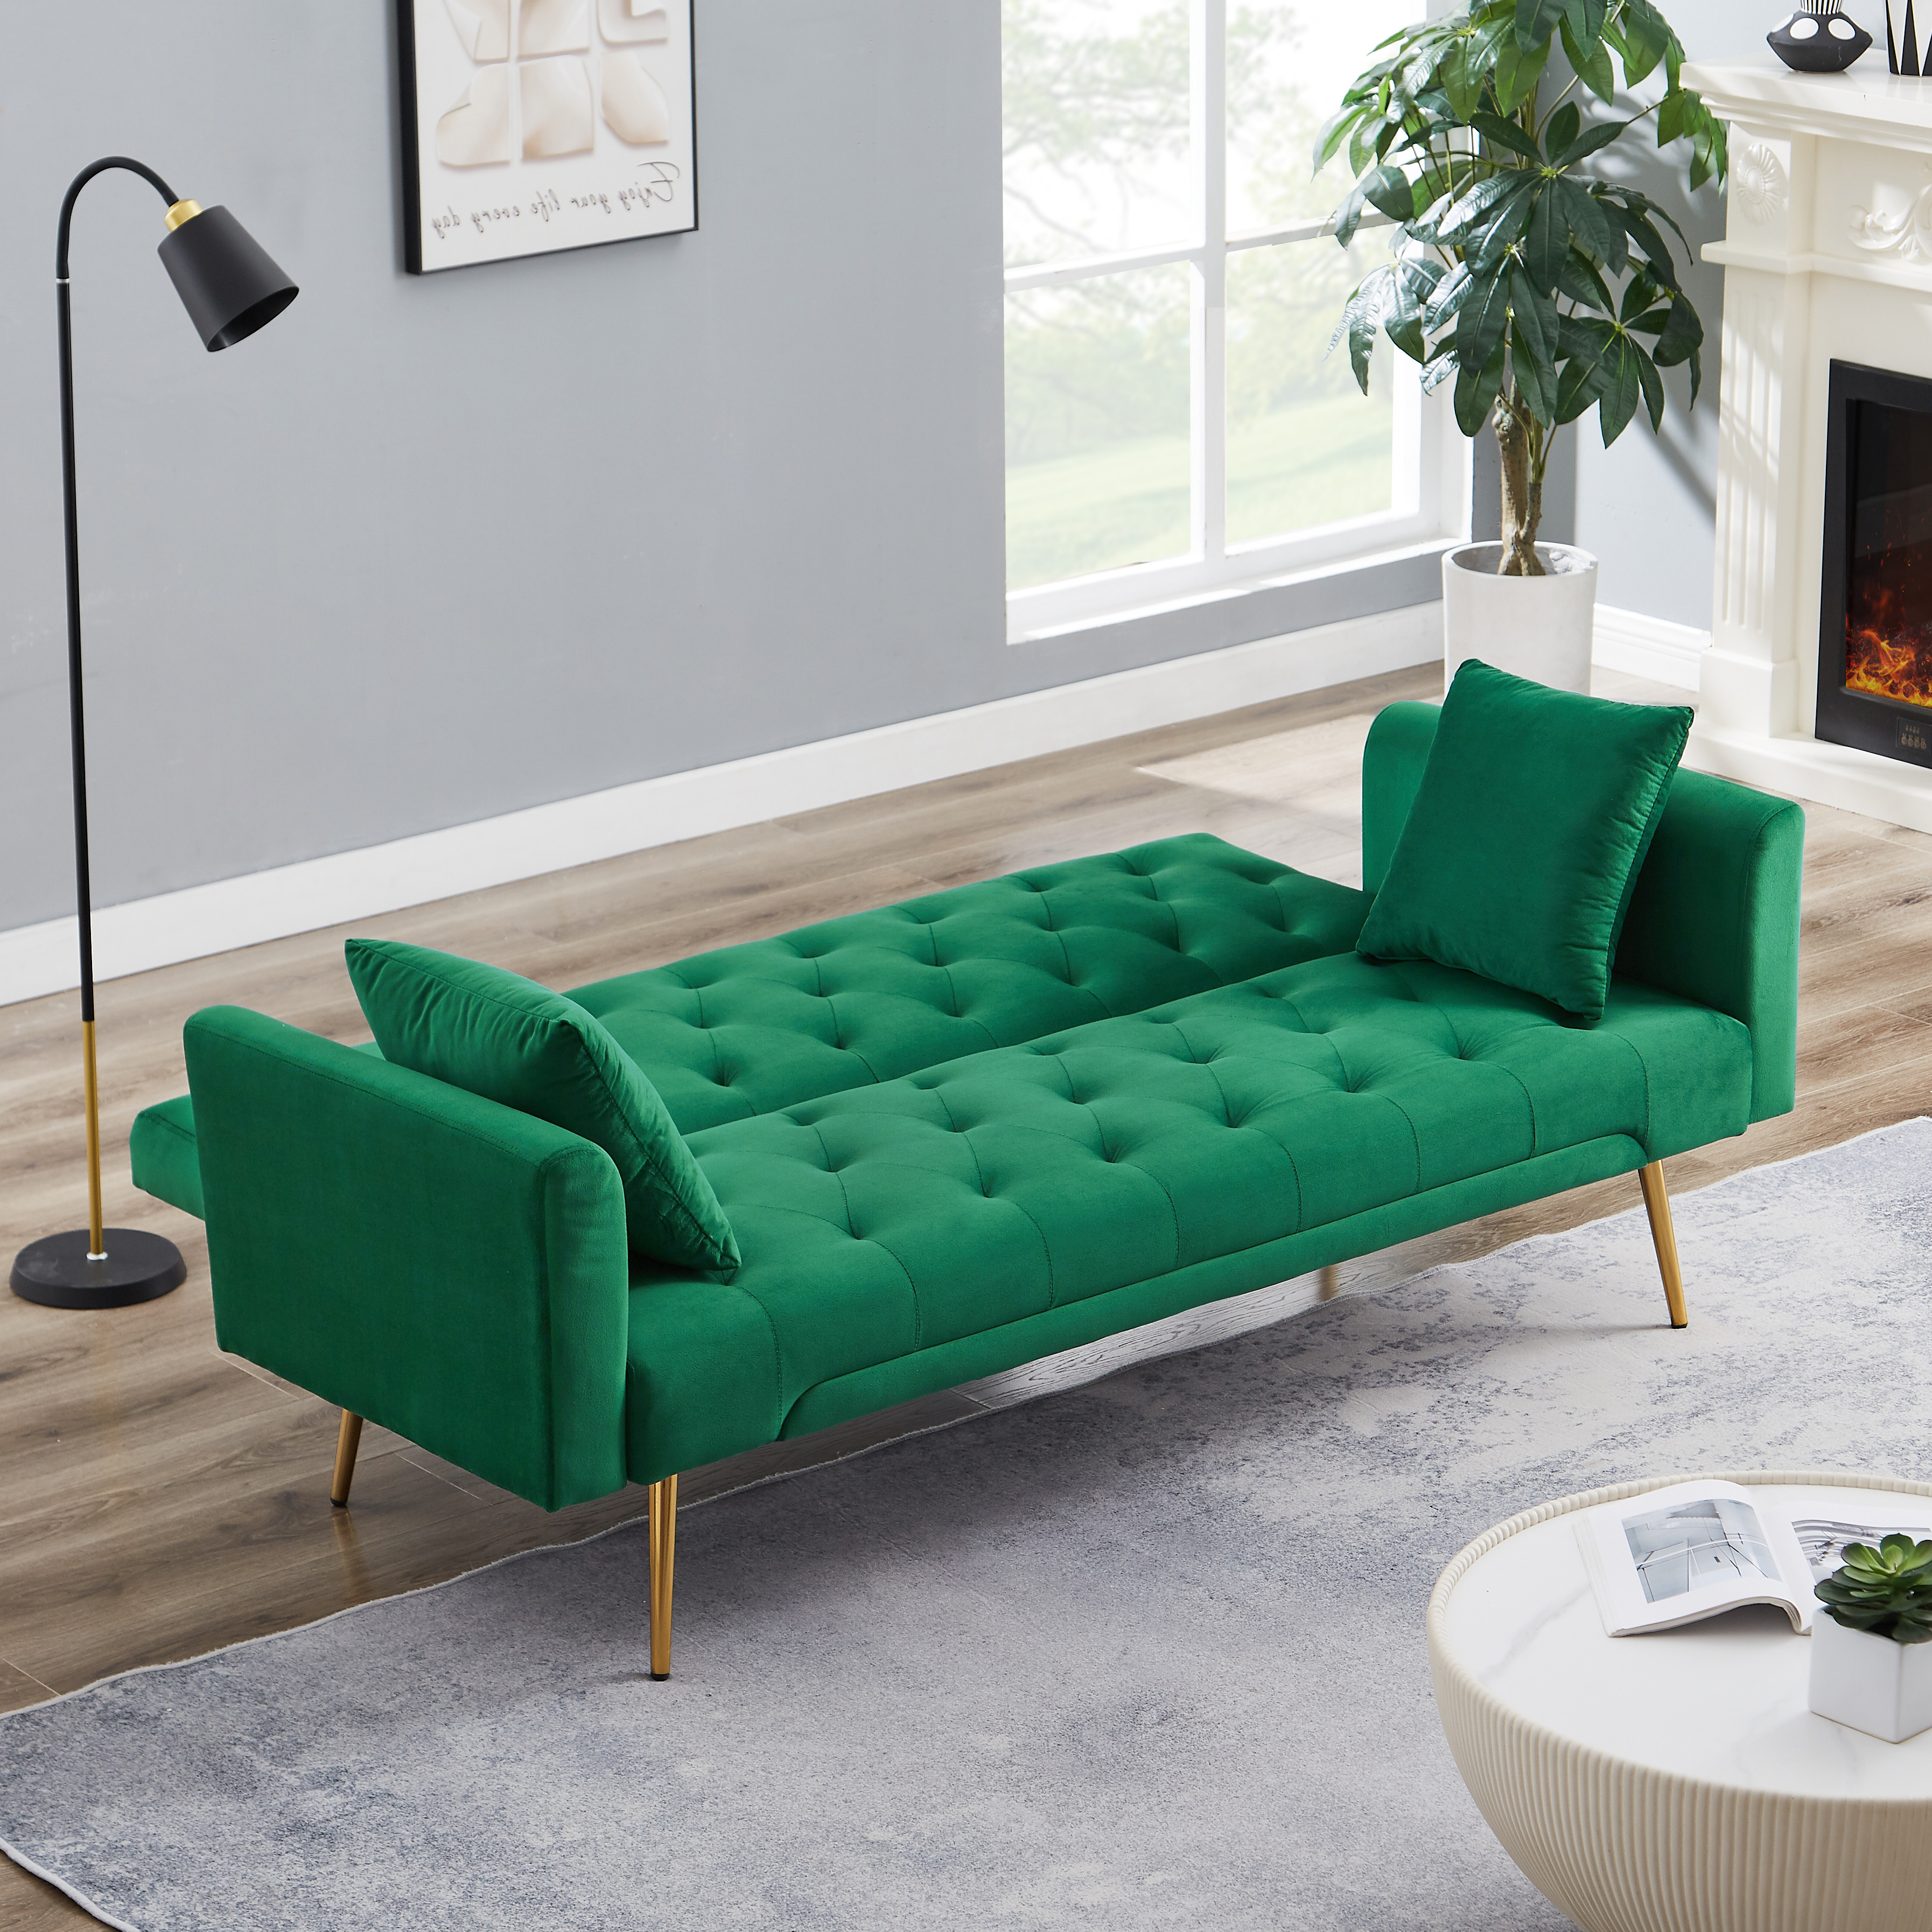 uhomepro Modern Sofa Bed, Convertible Sleeper Sofa with Metal Legs, 2 Pillows, Upholstery Fabric Futon Sofa Bed, Love Seat Living Room Bedroom Furniture for Small Space Office, Green - image 3 of 9